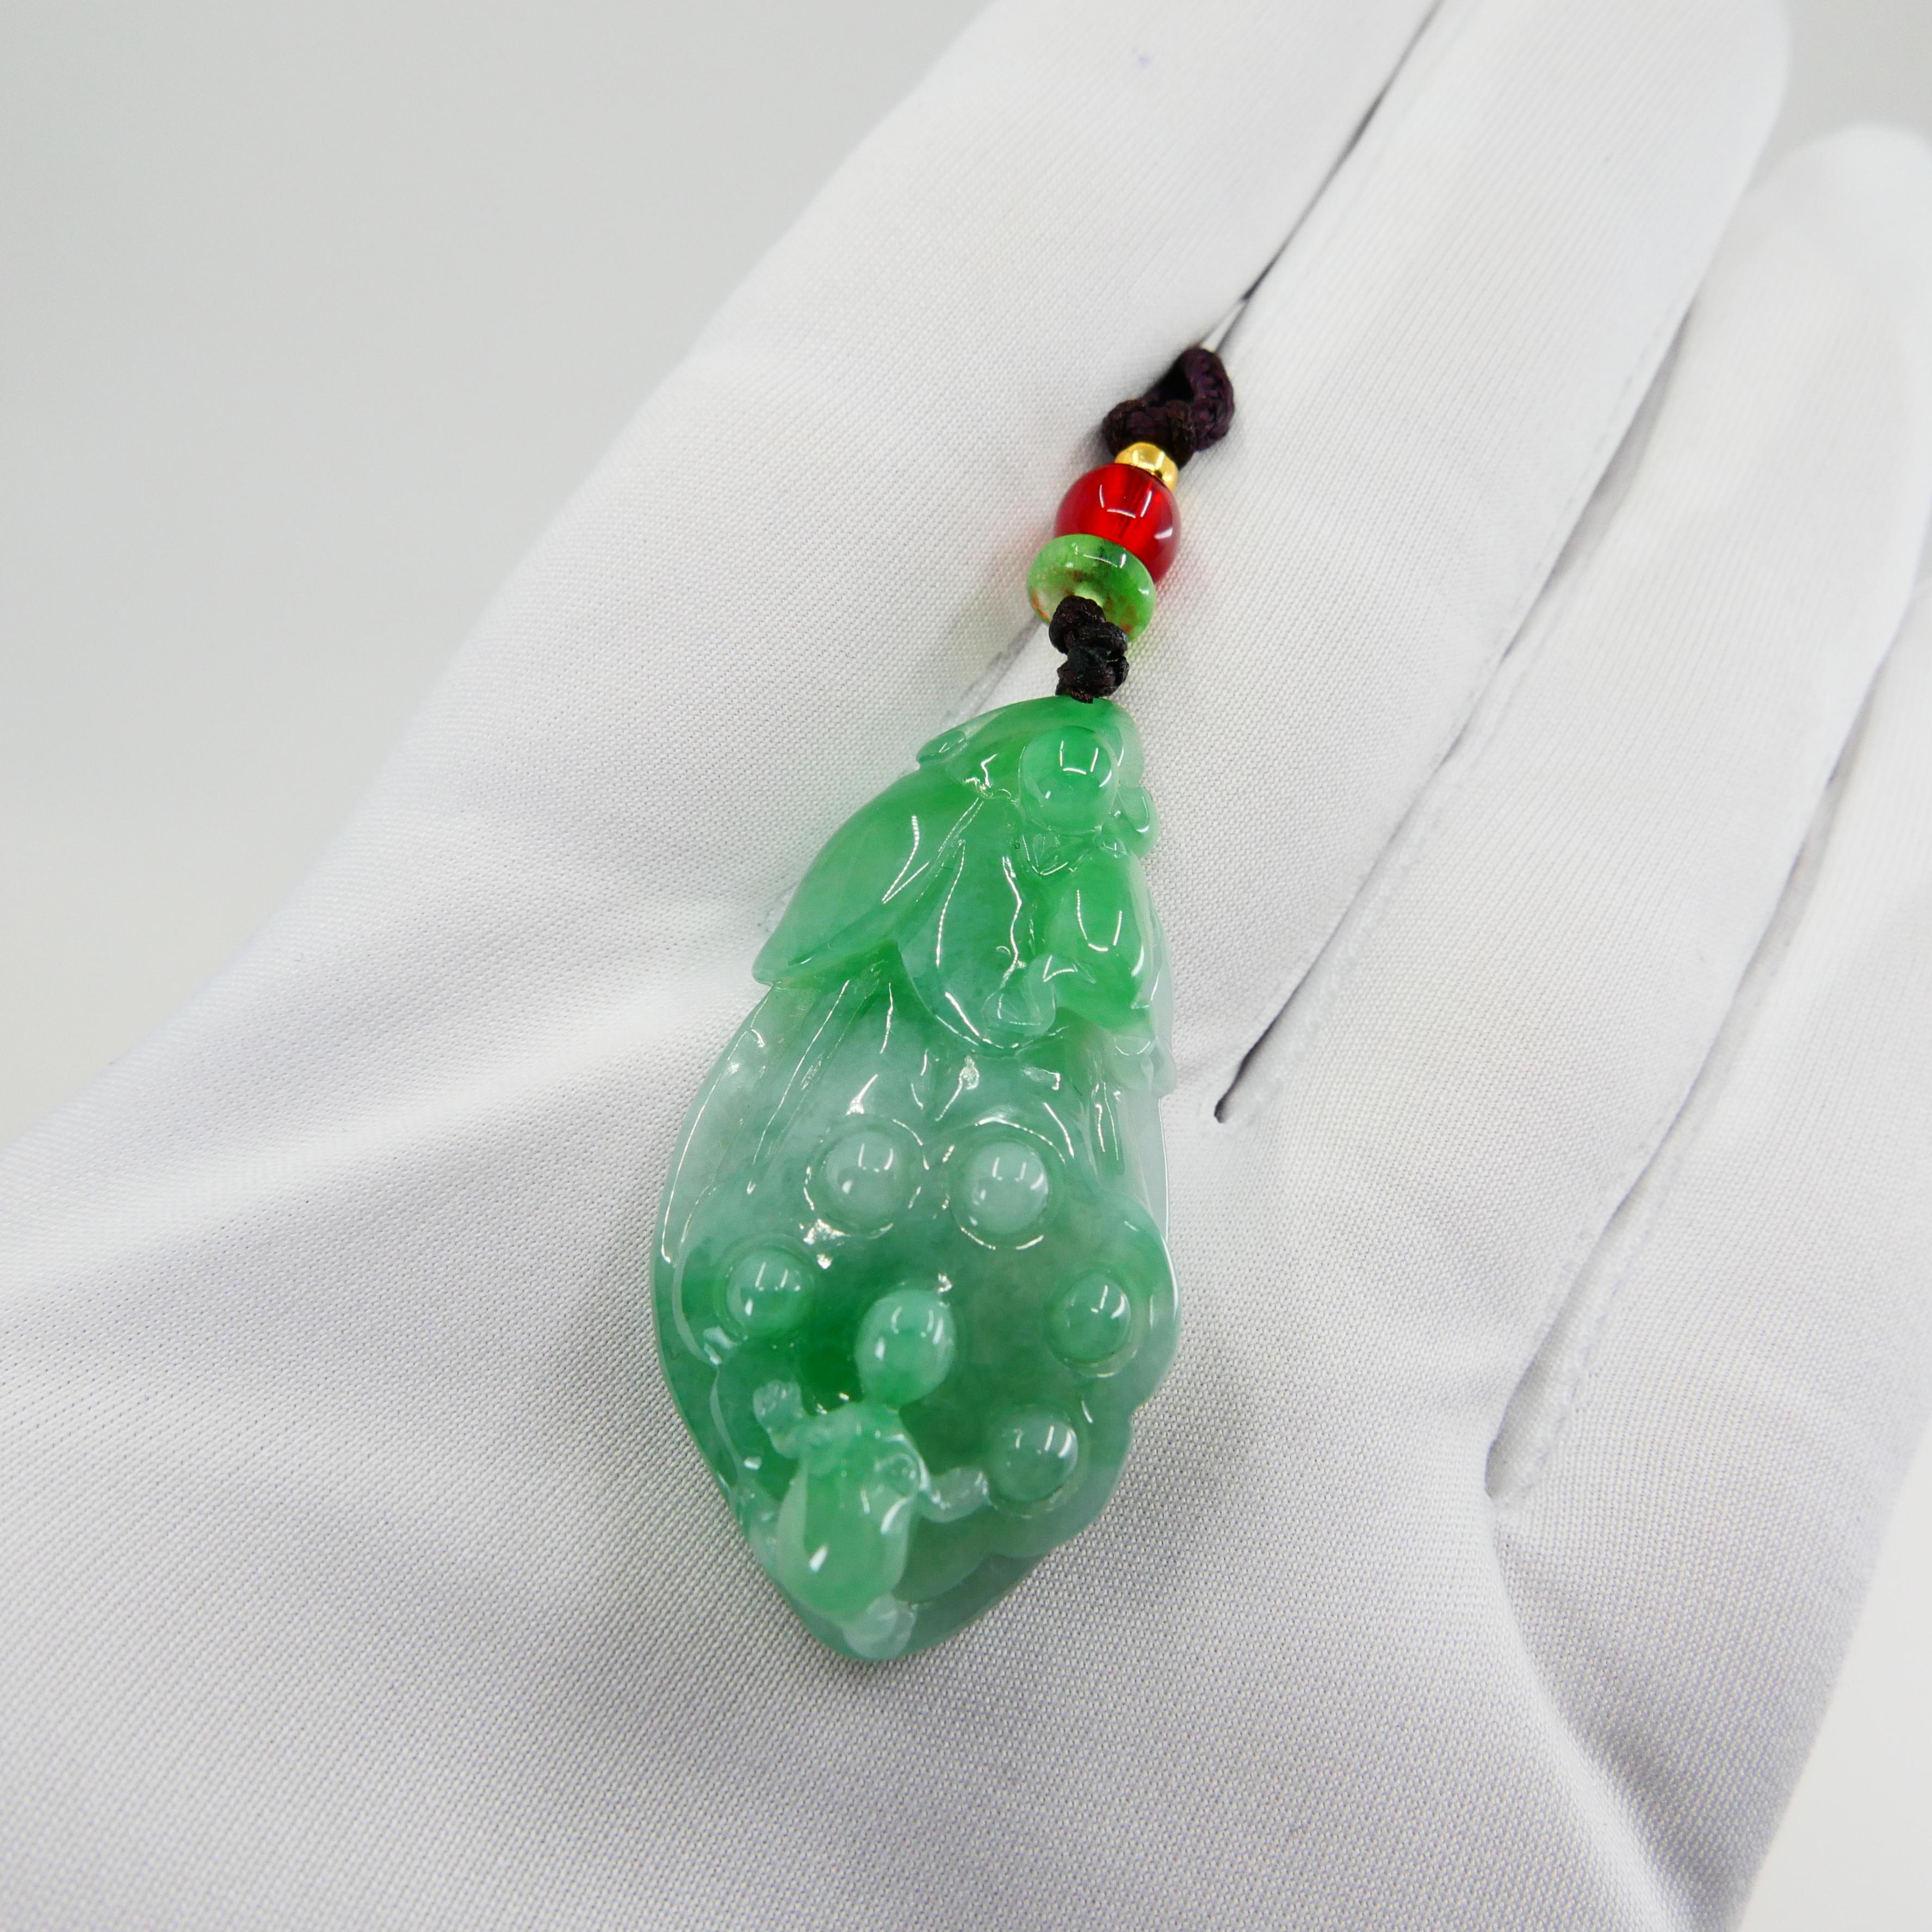 Rough Cut Certified 61.25 Cts Natural Apple Green Jadeite Jade Pendant Drop Necklace For Sale